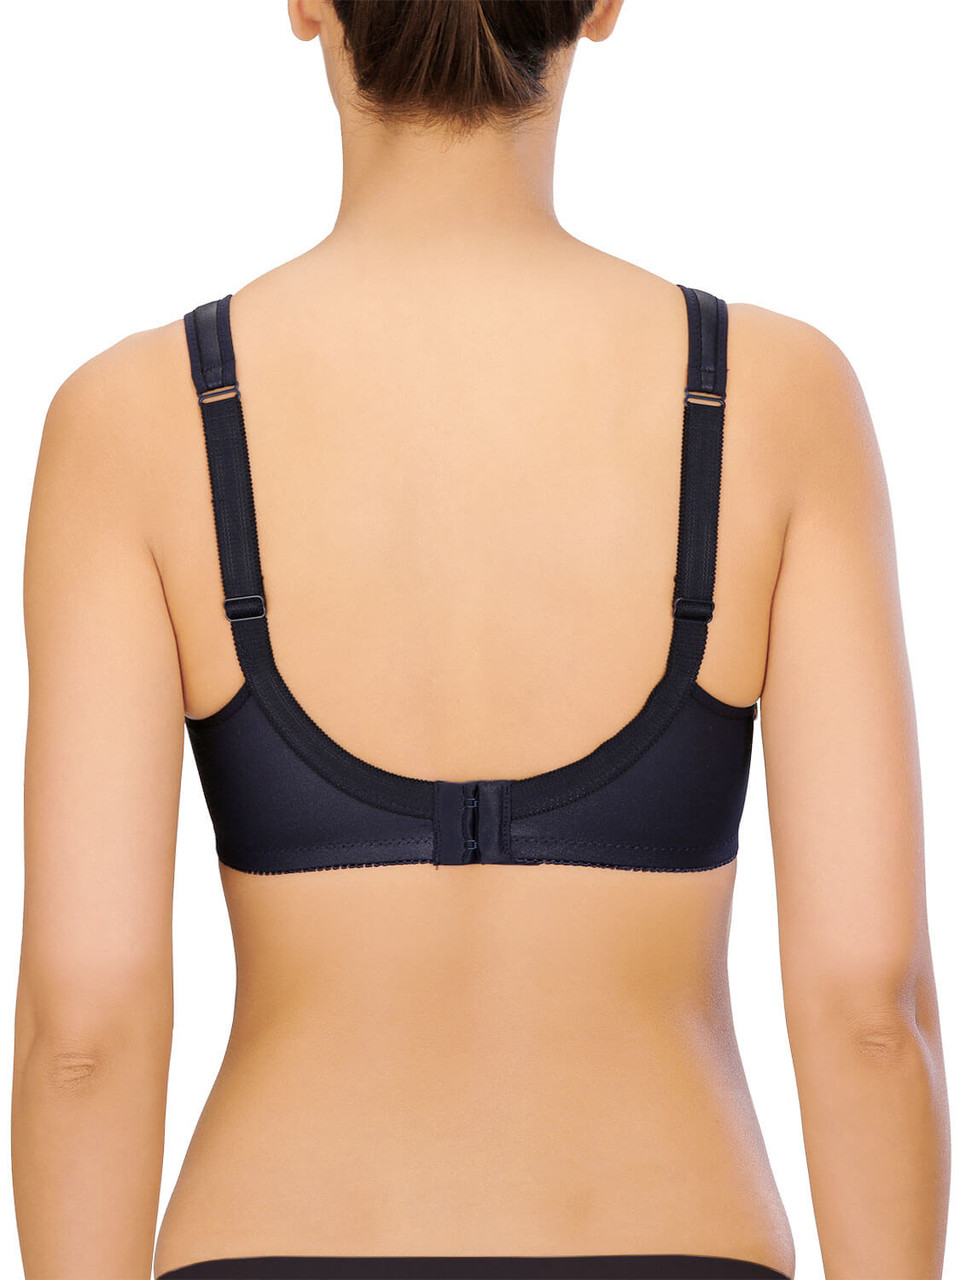 NATURANA Full coverage wide strap Cotton bra B-DD Cups in band sizes 14-36  - Beige & Navy - Arianne Lingerie